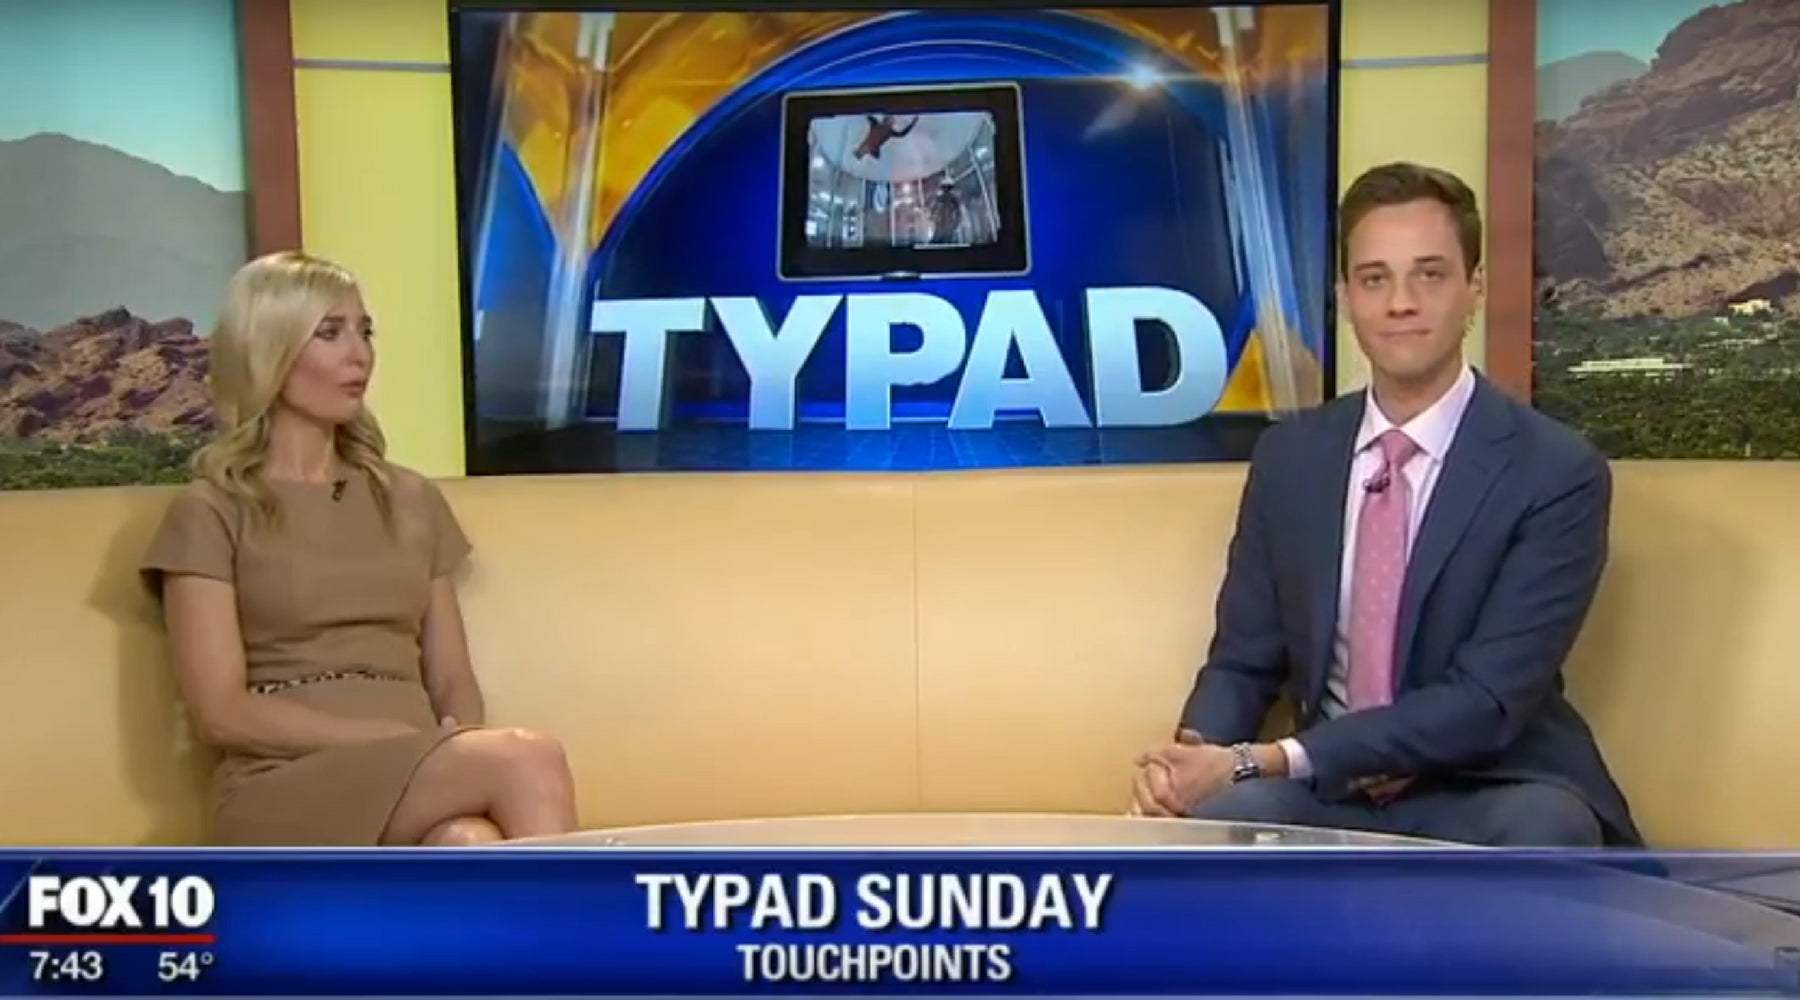 FOX10 - TyPad Sunday with The TouchPoint Solution